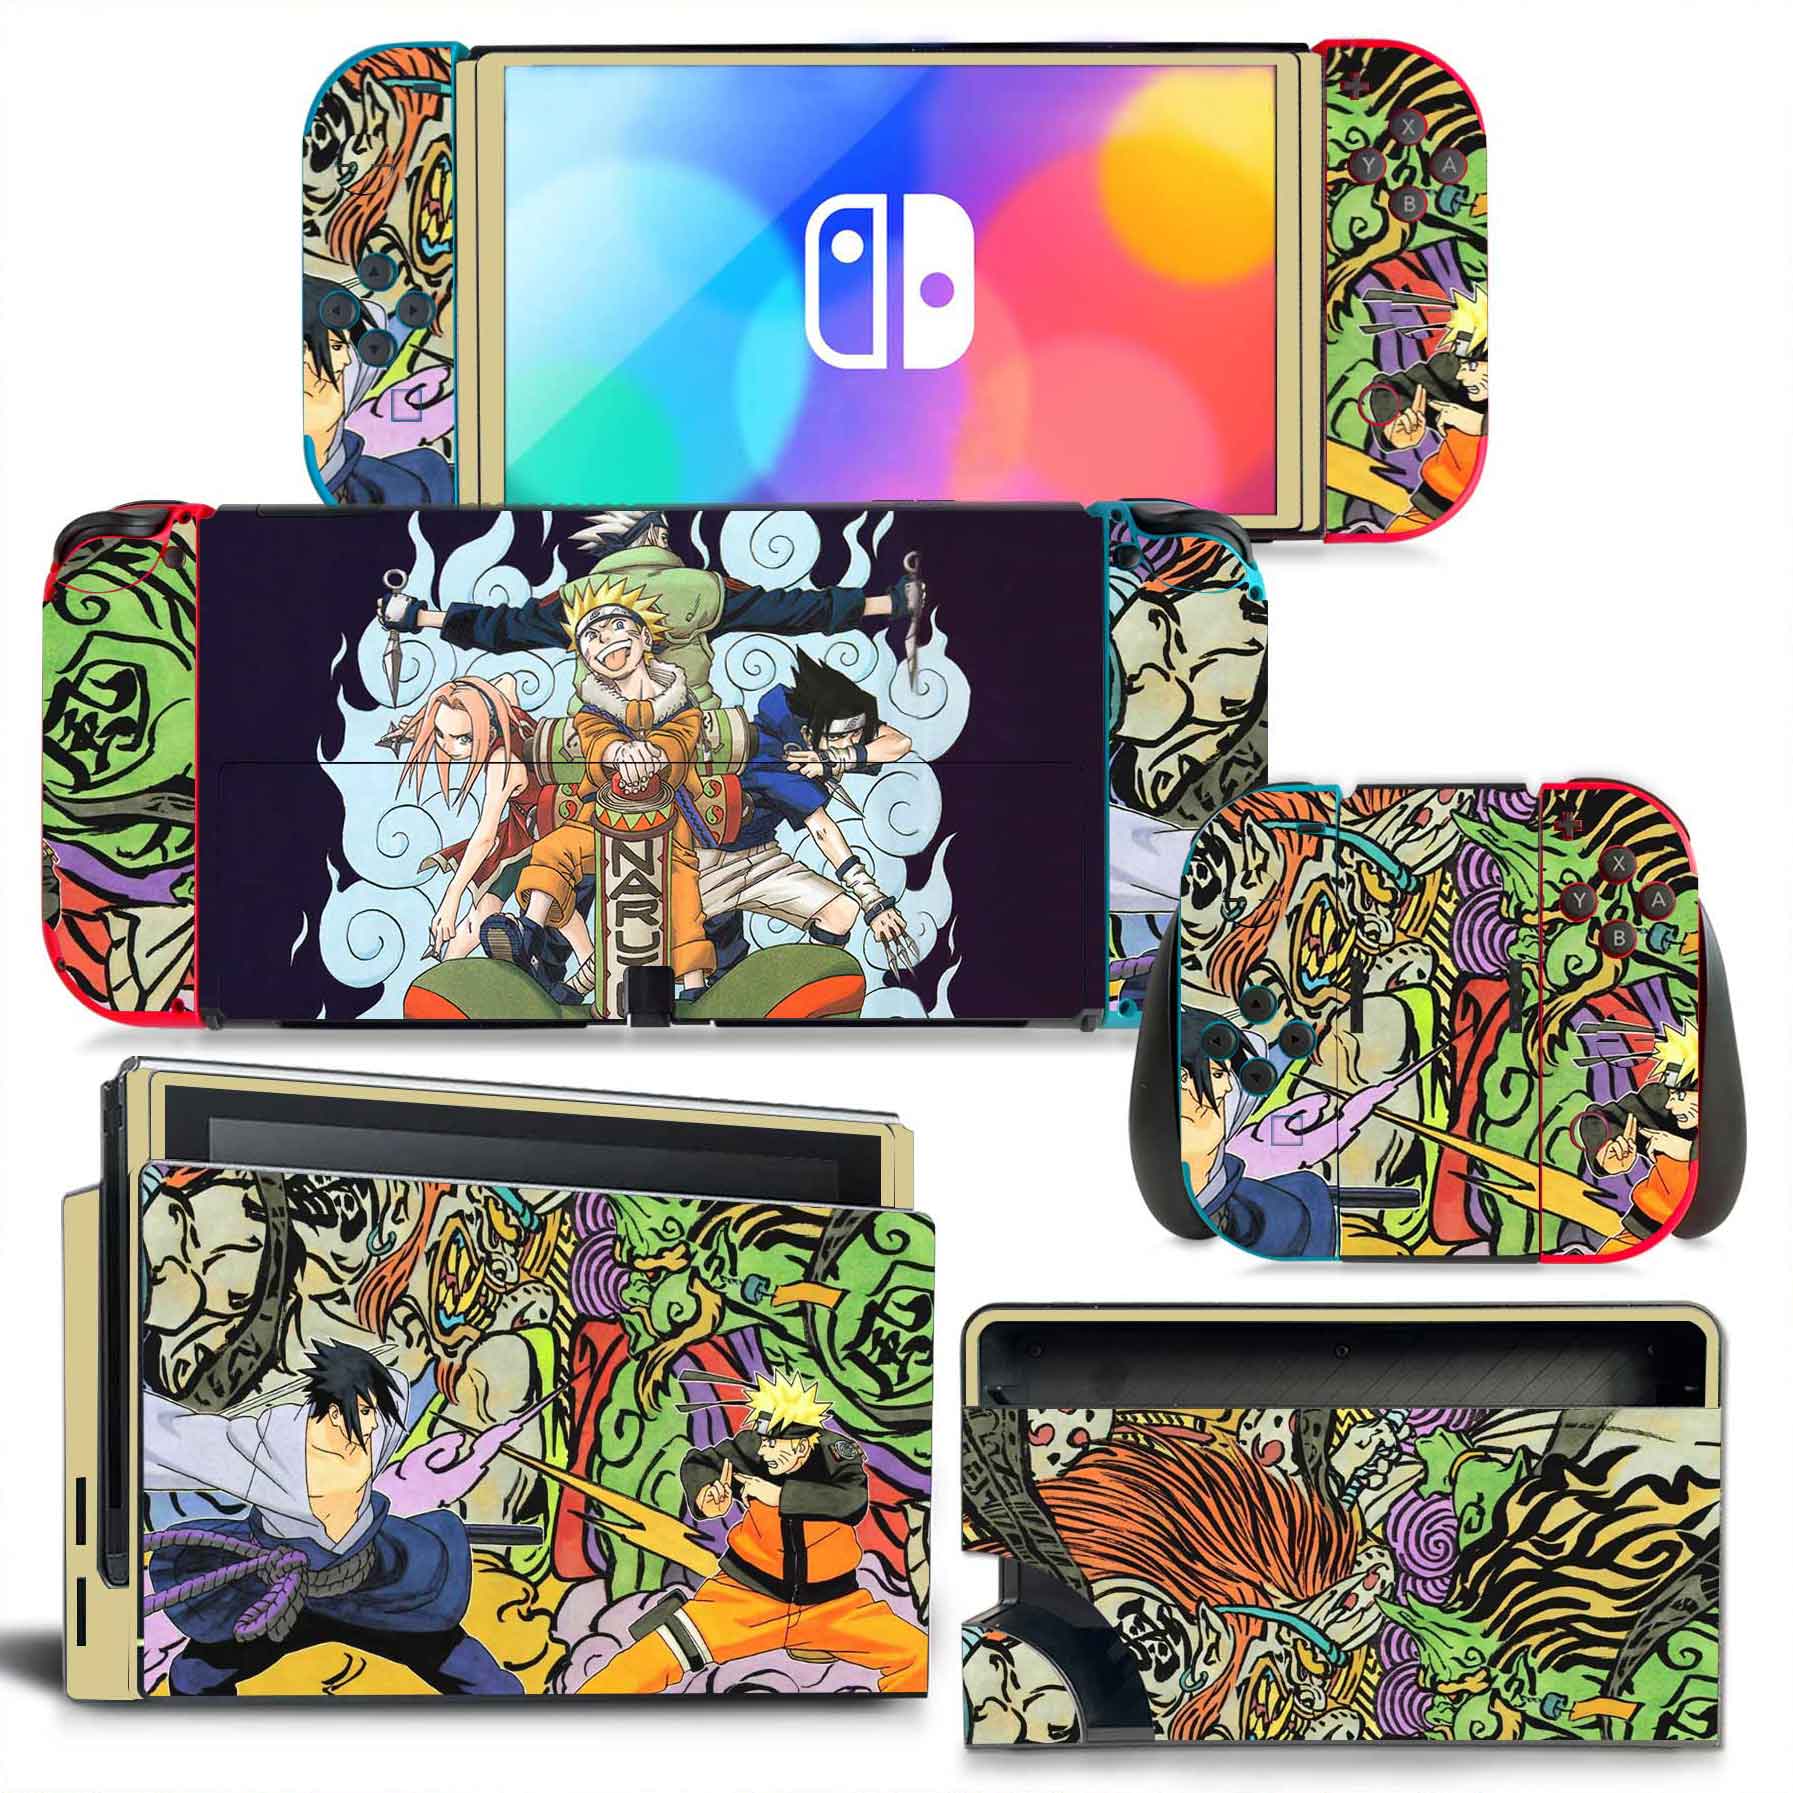 Anime Nintendo Switch Sticker Protective Cover 6